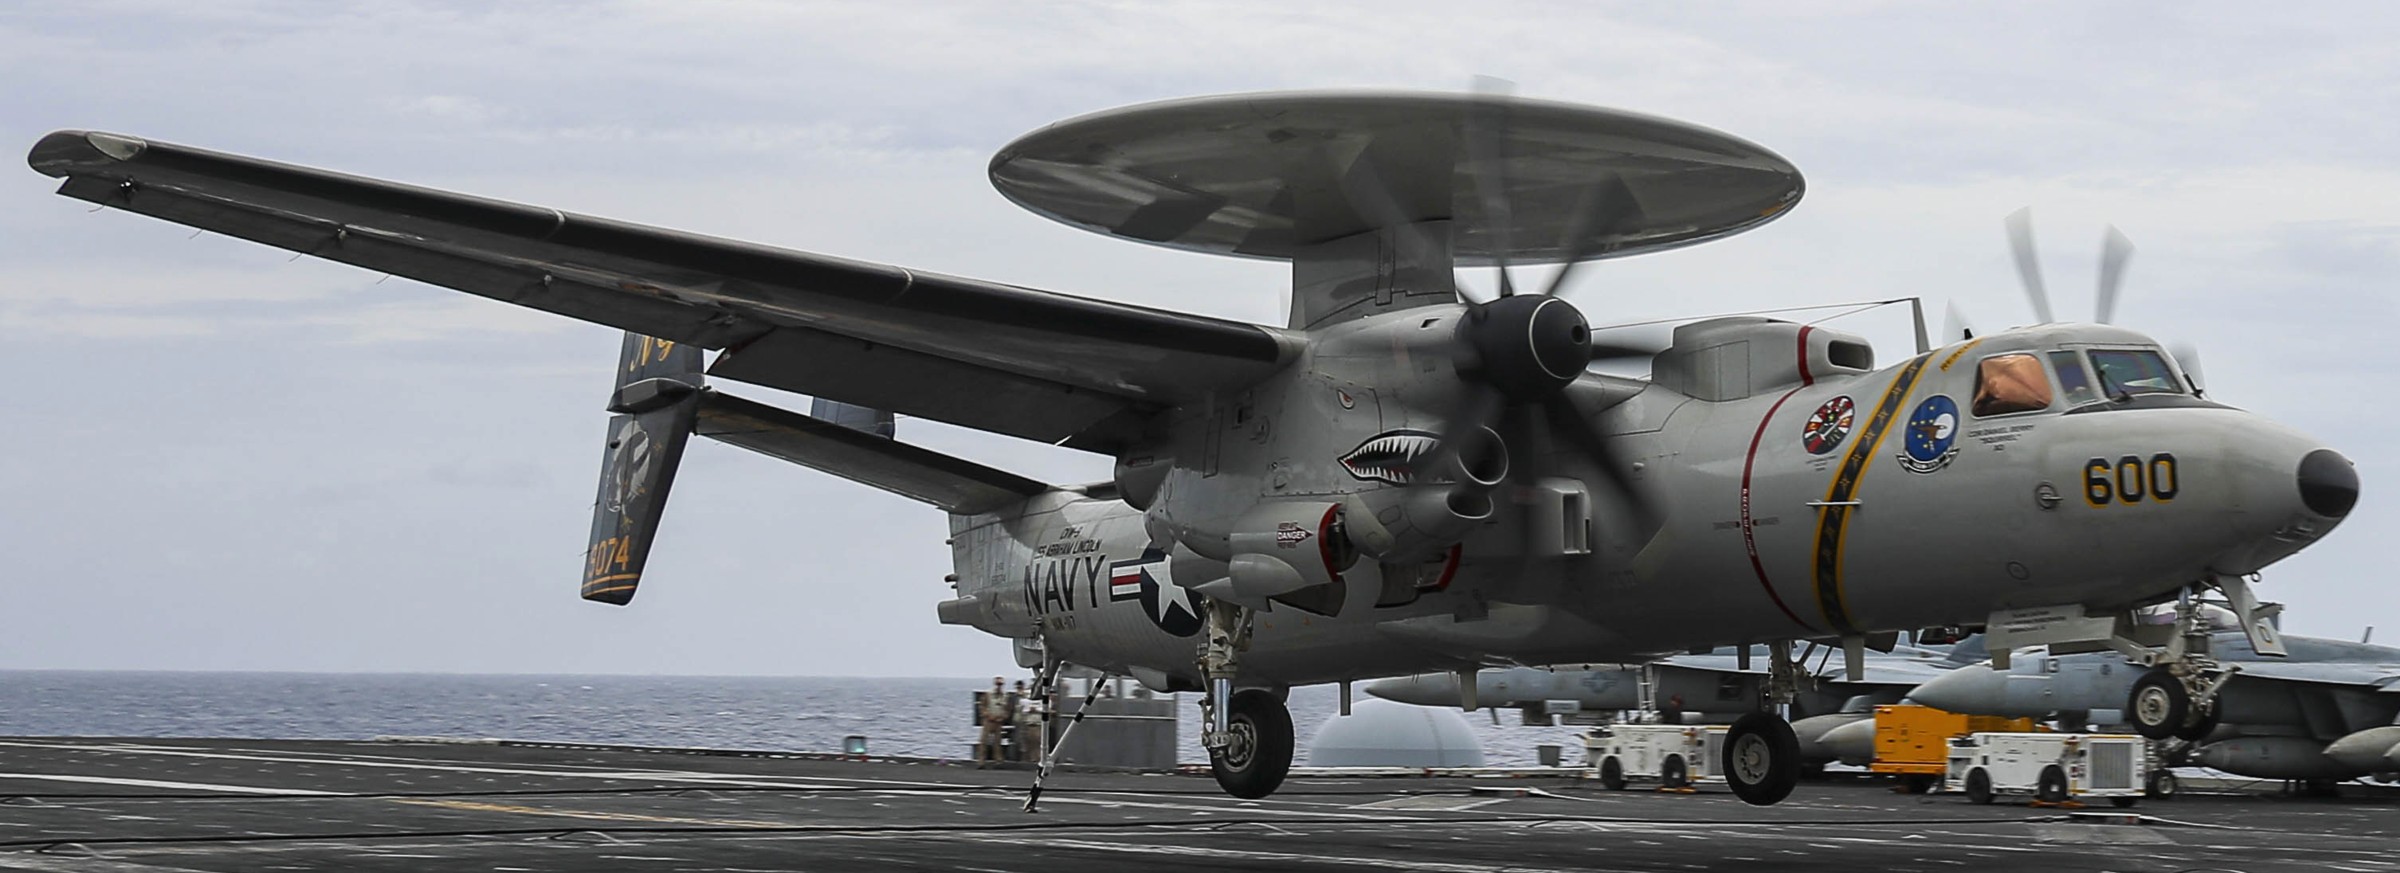 vaw-117 wallbangers airborne command and control squadron navy e-2d hawkeye cvw-9 uss abraham lincoln cvn-72 23